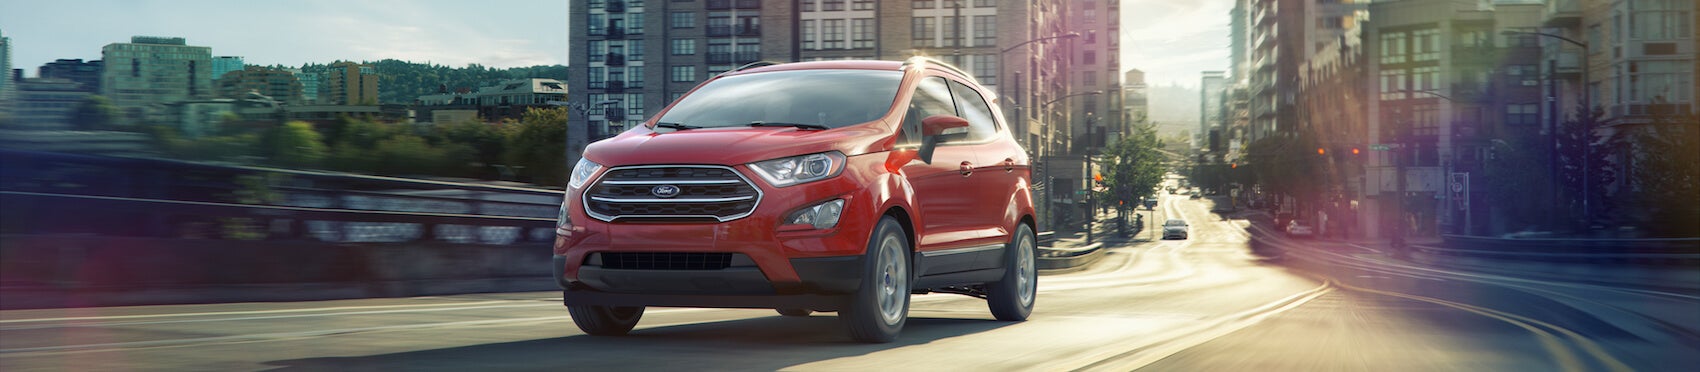 Ford EcoSport Lease Deals Dunmore PA